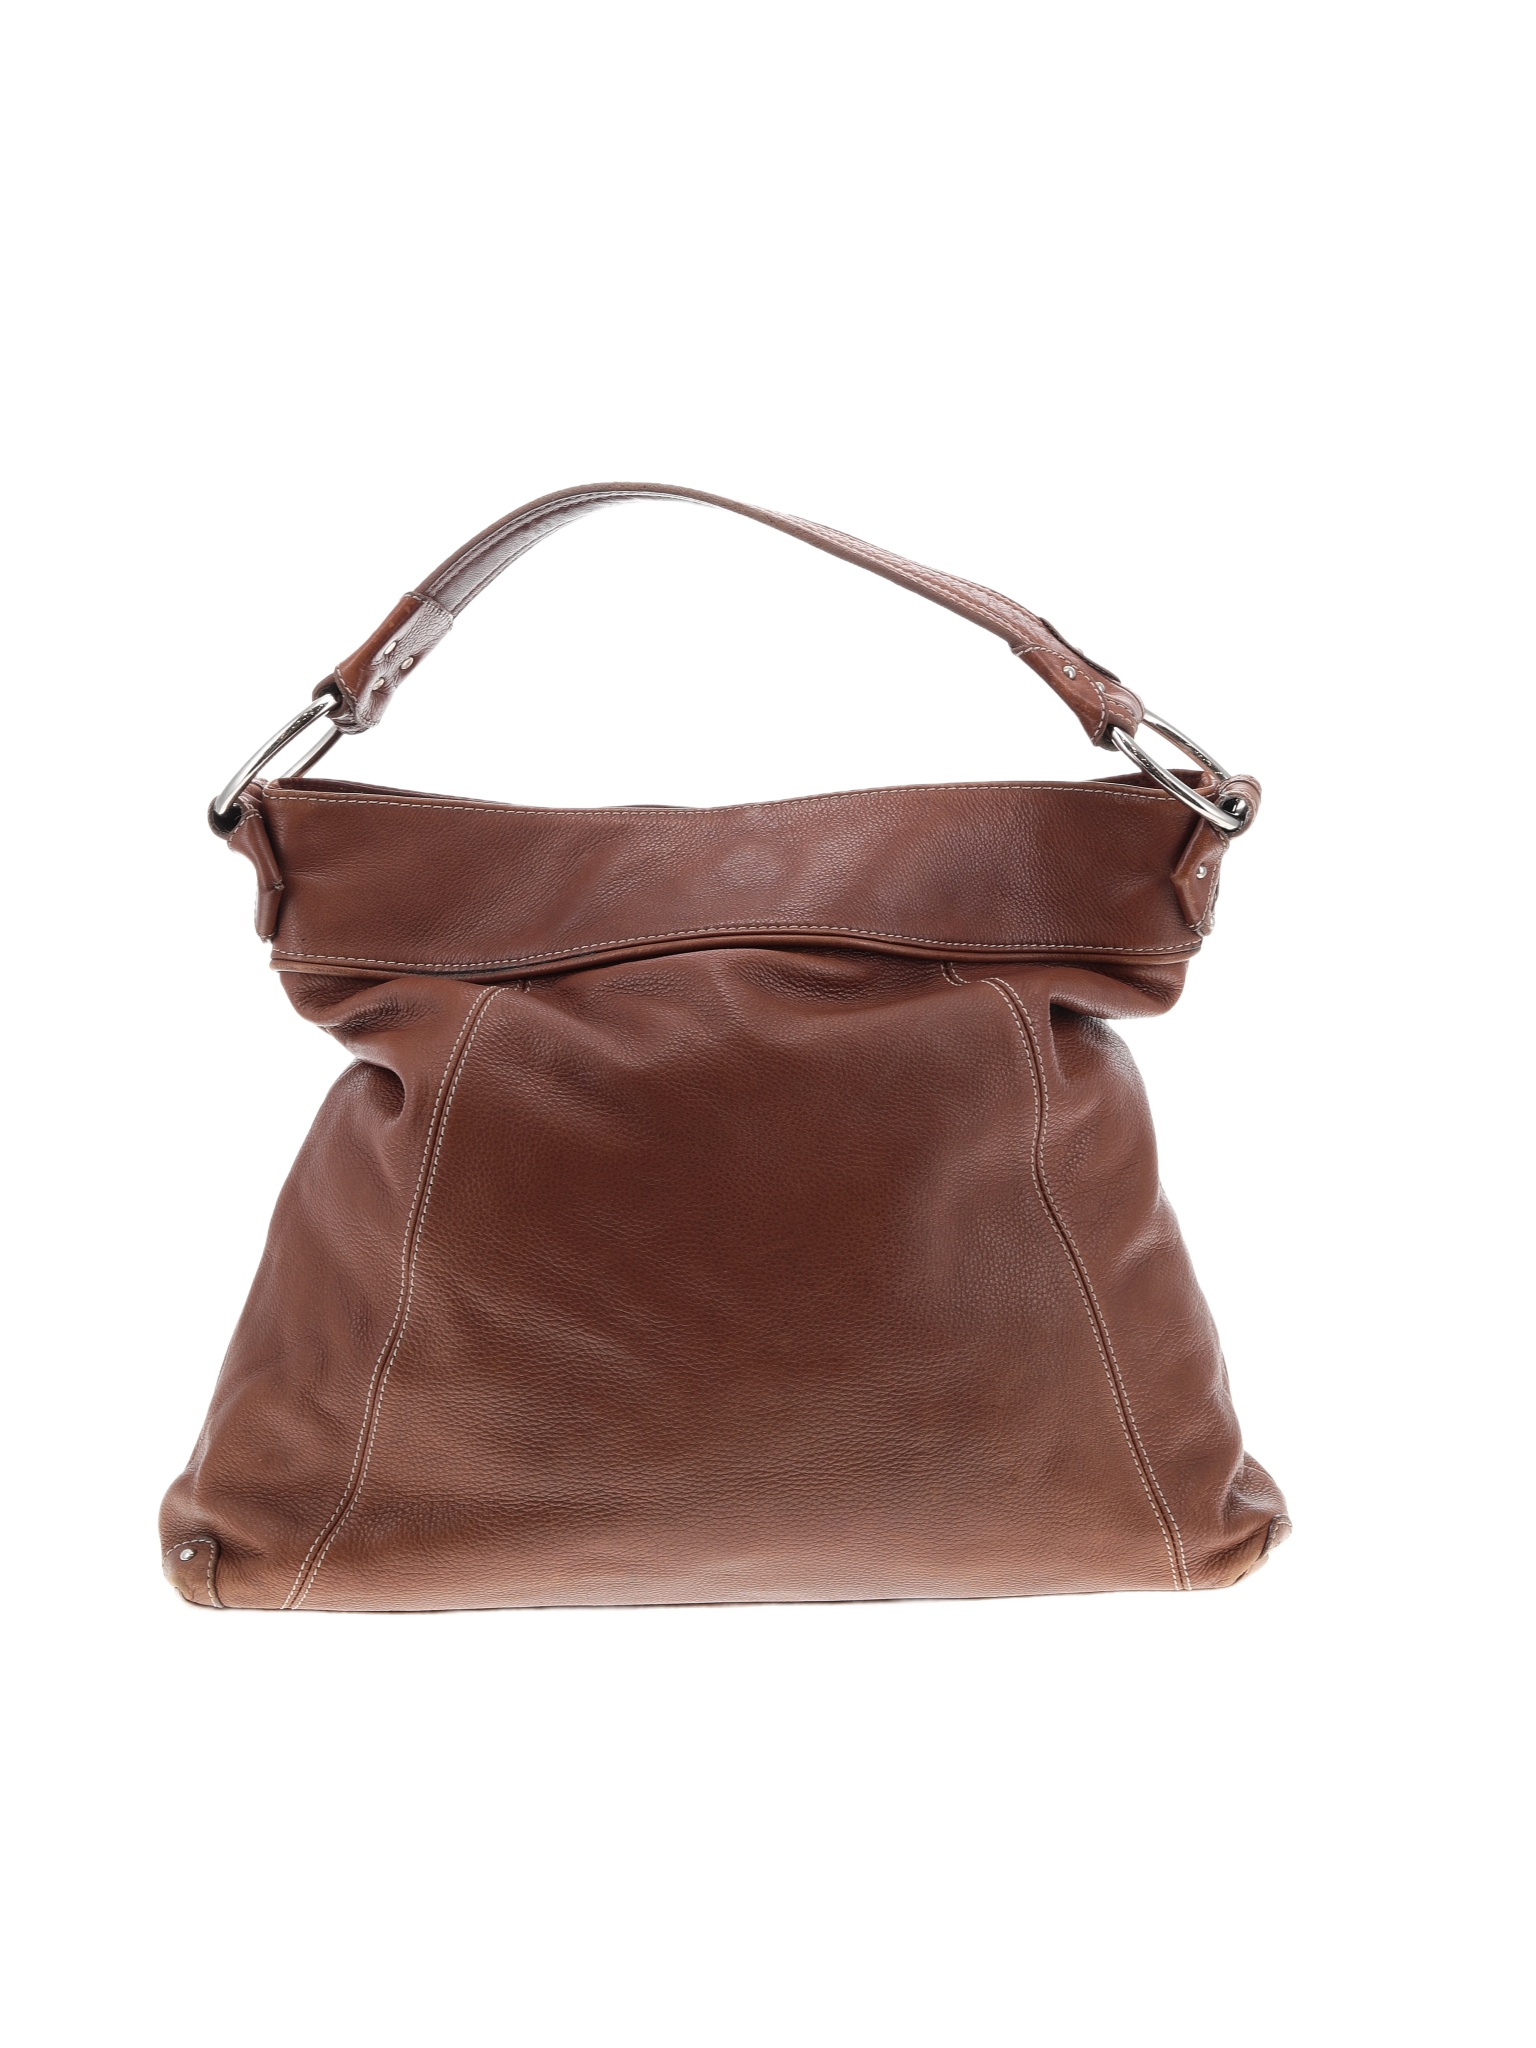 Clarks Handbags Sale Up To 90% Off Retail